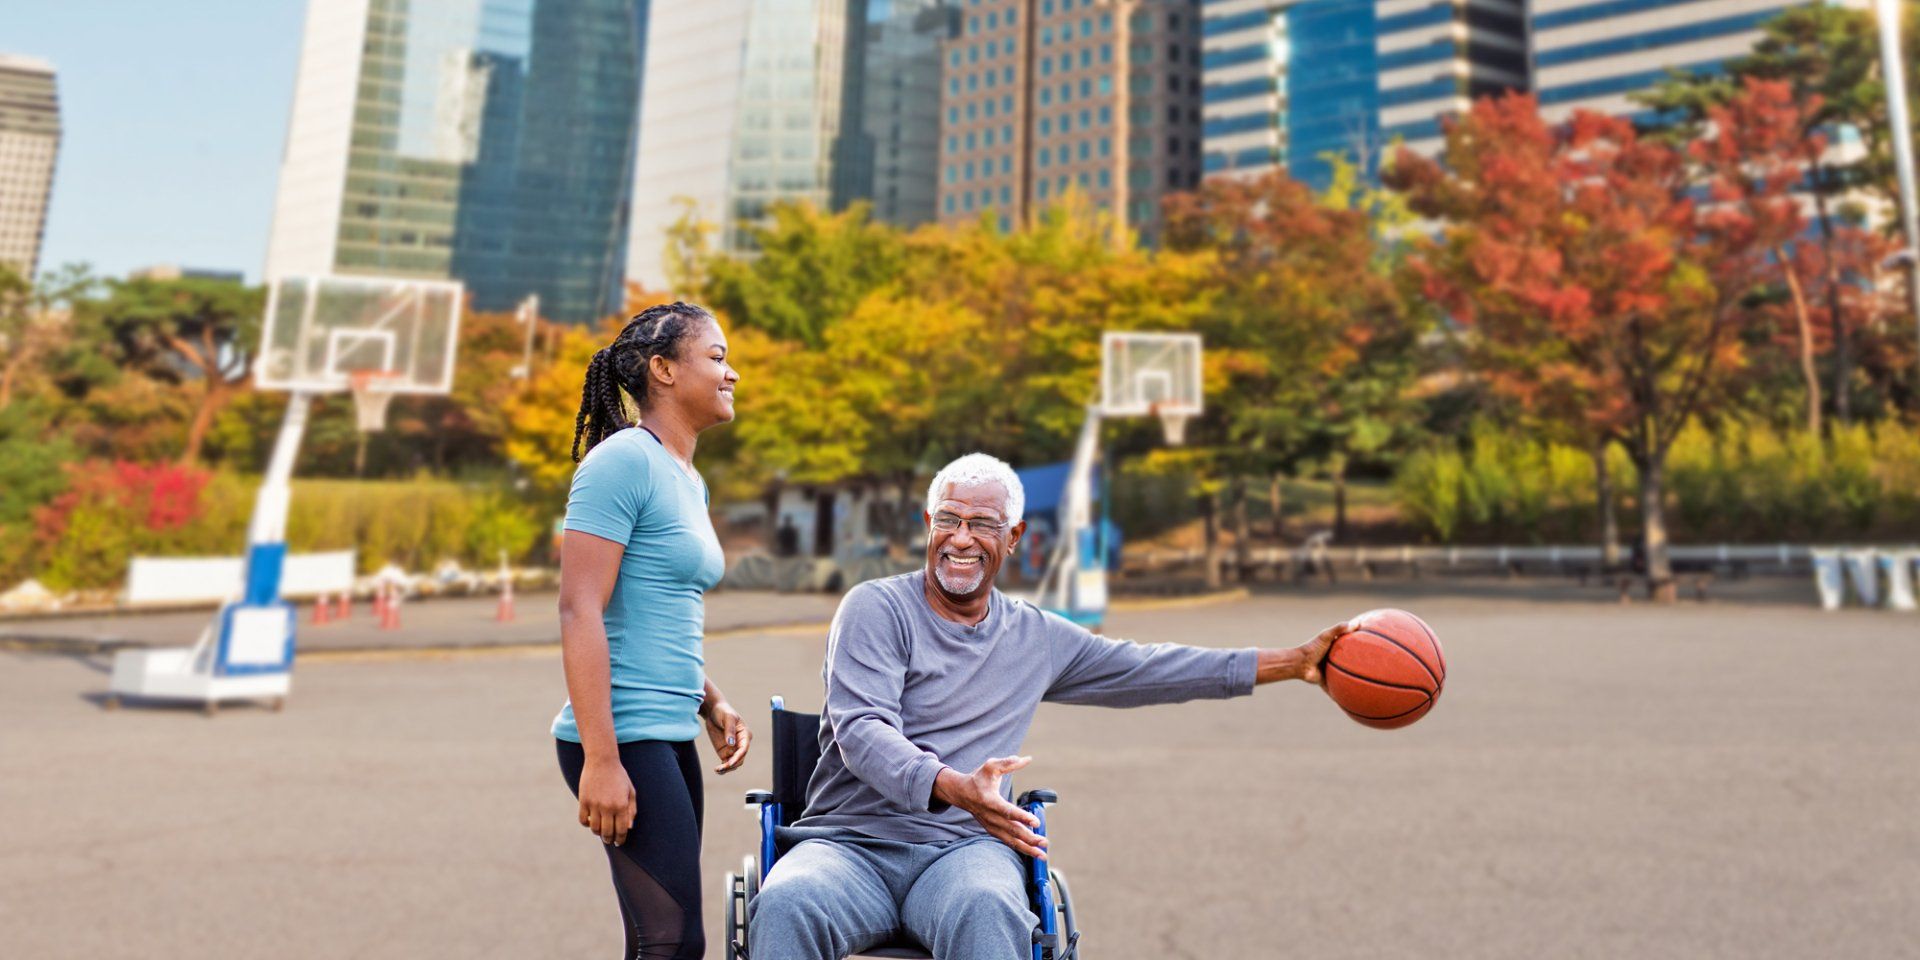 older man in wheelchair holds basketball while younger woman stands next to him